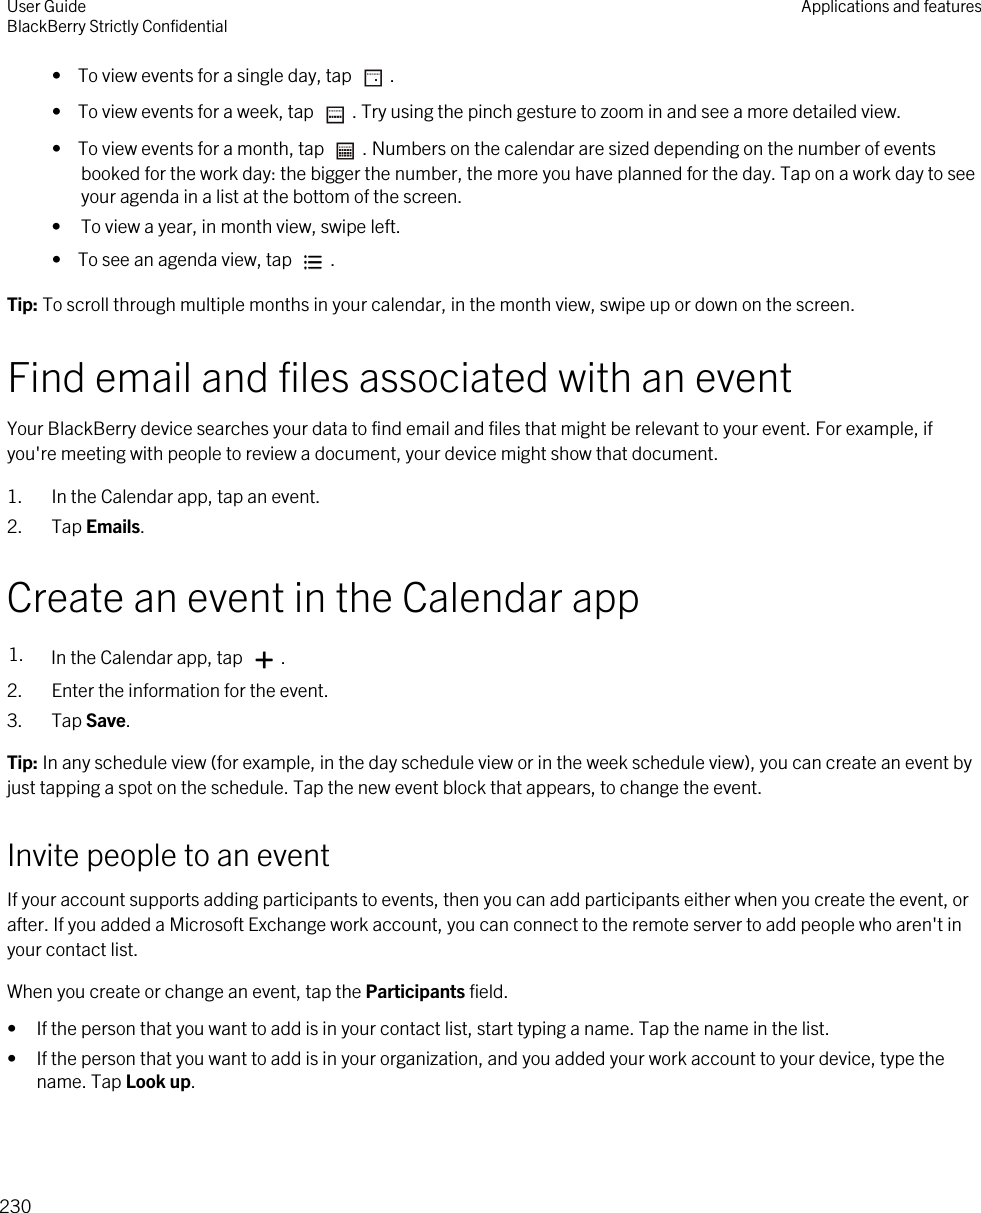 •  To view events for a single day, tap  .•  To view events for a week, tap  . Try using the pinch gesture to zoom in and see a more detailed view.•  To view events for a month, tap  . Numbers on the calendar are sized depending on the number of events booked for the work day: the bigger the number, the more you have planned for the day. Tap on a work day to see your agenda in a list at the bottom of the screen.• To view a year, in month view, swipe left.•  To see an agenda view, tap  .Tip: To scroll through multiple months in your calendar, in the month view, swipe up or down on the screen.Find email and files associated with an eventYour BlackBerry device searches your data to find email and files that might be relevant to your event. For example, if you&apos;re meeting with people to review a document, your device might show that document.1. In the Calendar app, tap an event.2. Tap Emails.Create an event in the Calendar app1. In the Calendar app, tap  .2. Enter the information for the event.3. Tap Save.Tip: In any schedule view (for example, in the day schedule view or in the week schedule view), you can create an event by just tapping a spot on the schedule. Tap the new event block that appears, to change the event.Invite people to an eventIf your account supports adding participants to events, then you can add participants either when you create the event, or after. If you added a Microsoft Exchange work account, you can connect to the remote server to add people who aren&apos;t in your contact list.When you create or change an event, tap the Participants field.• If the person that you want to add is in your contact list, start typing a name. Tap the name in the list.• If the person that you want to add is in your organization, and you added your work account to your device, type the name. Tap Look up.User GuideBlackBerry Strictly Confidential Applications and features230